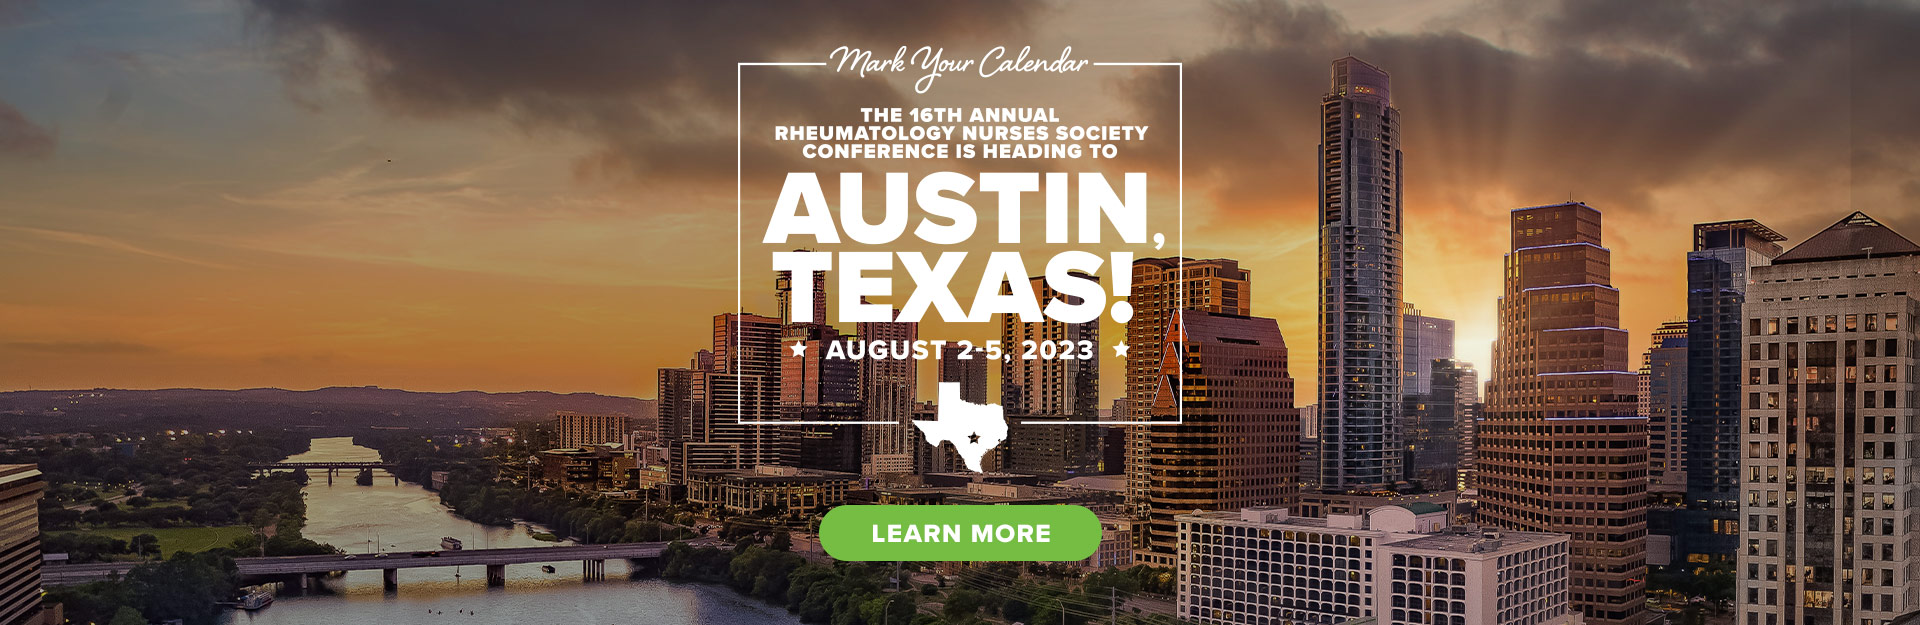 2023 RNS Conference / Aug. 2-5 / Austin, TX